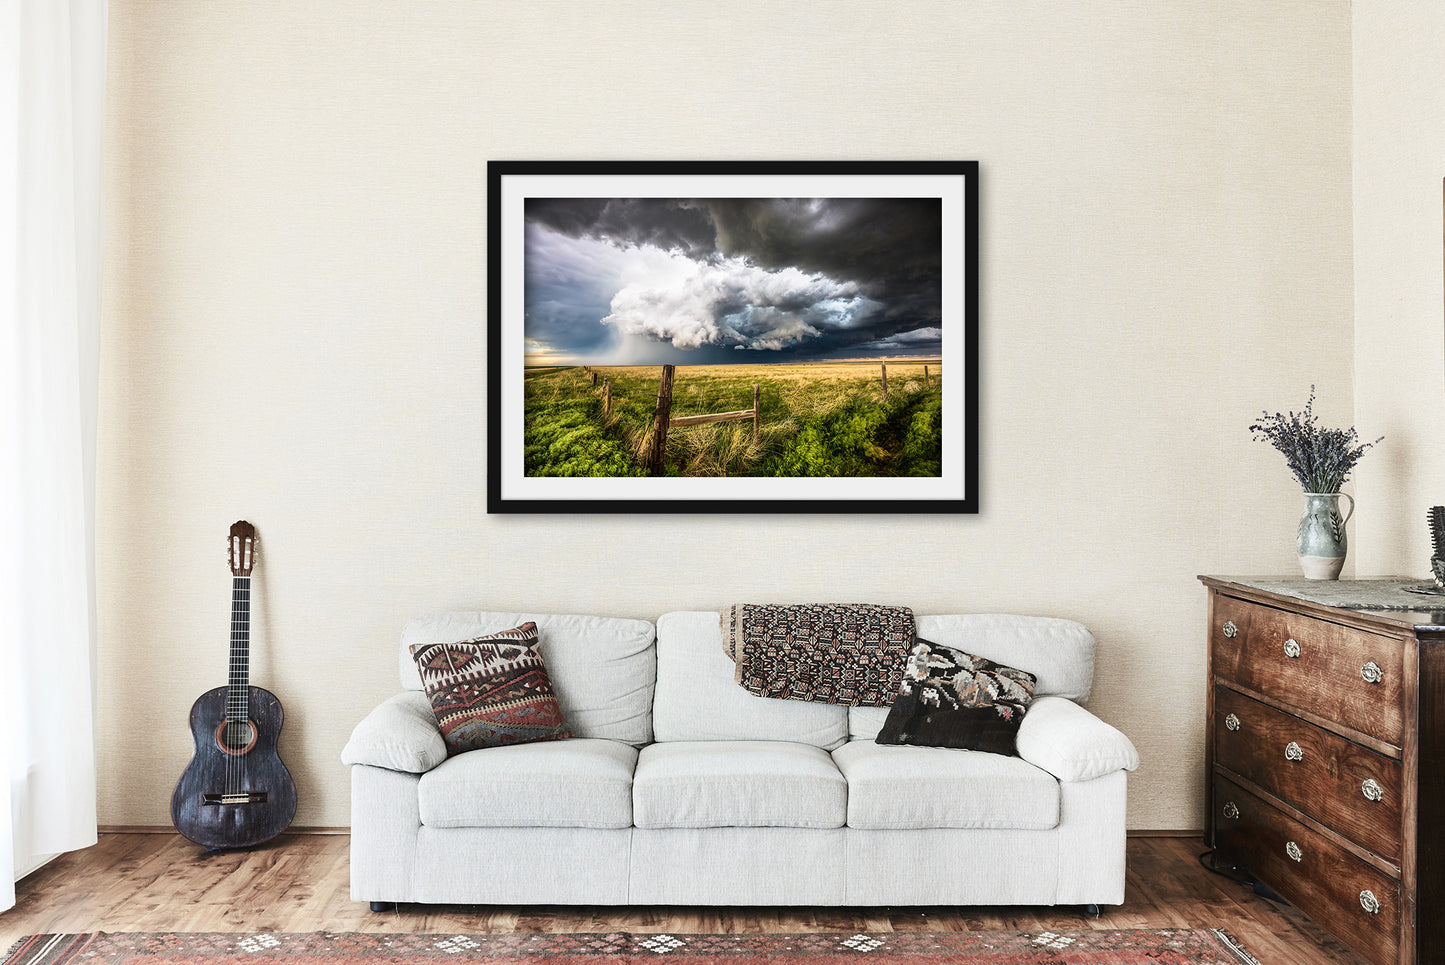 Supercell Thunderstorm Framed and Matted Print | Storm Photo | Colorado Decor | Prairie Photography | Great Plains Wall Art | Ready to Hang